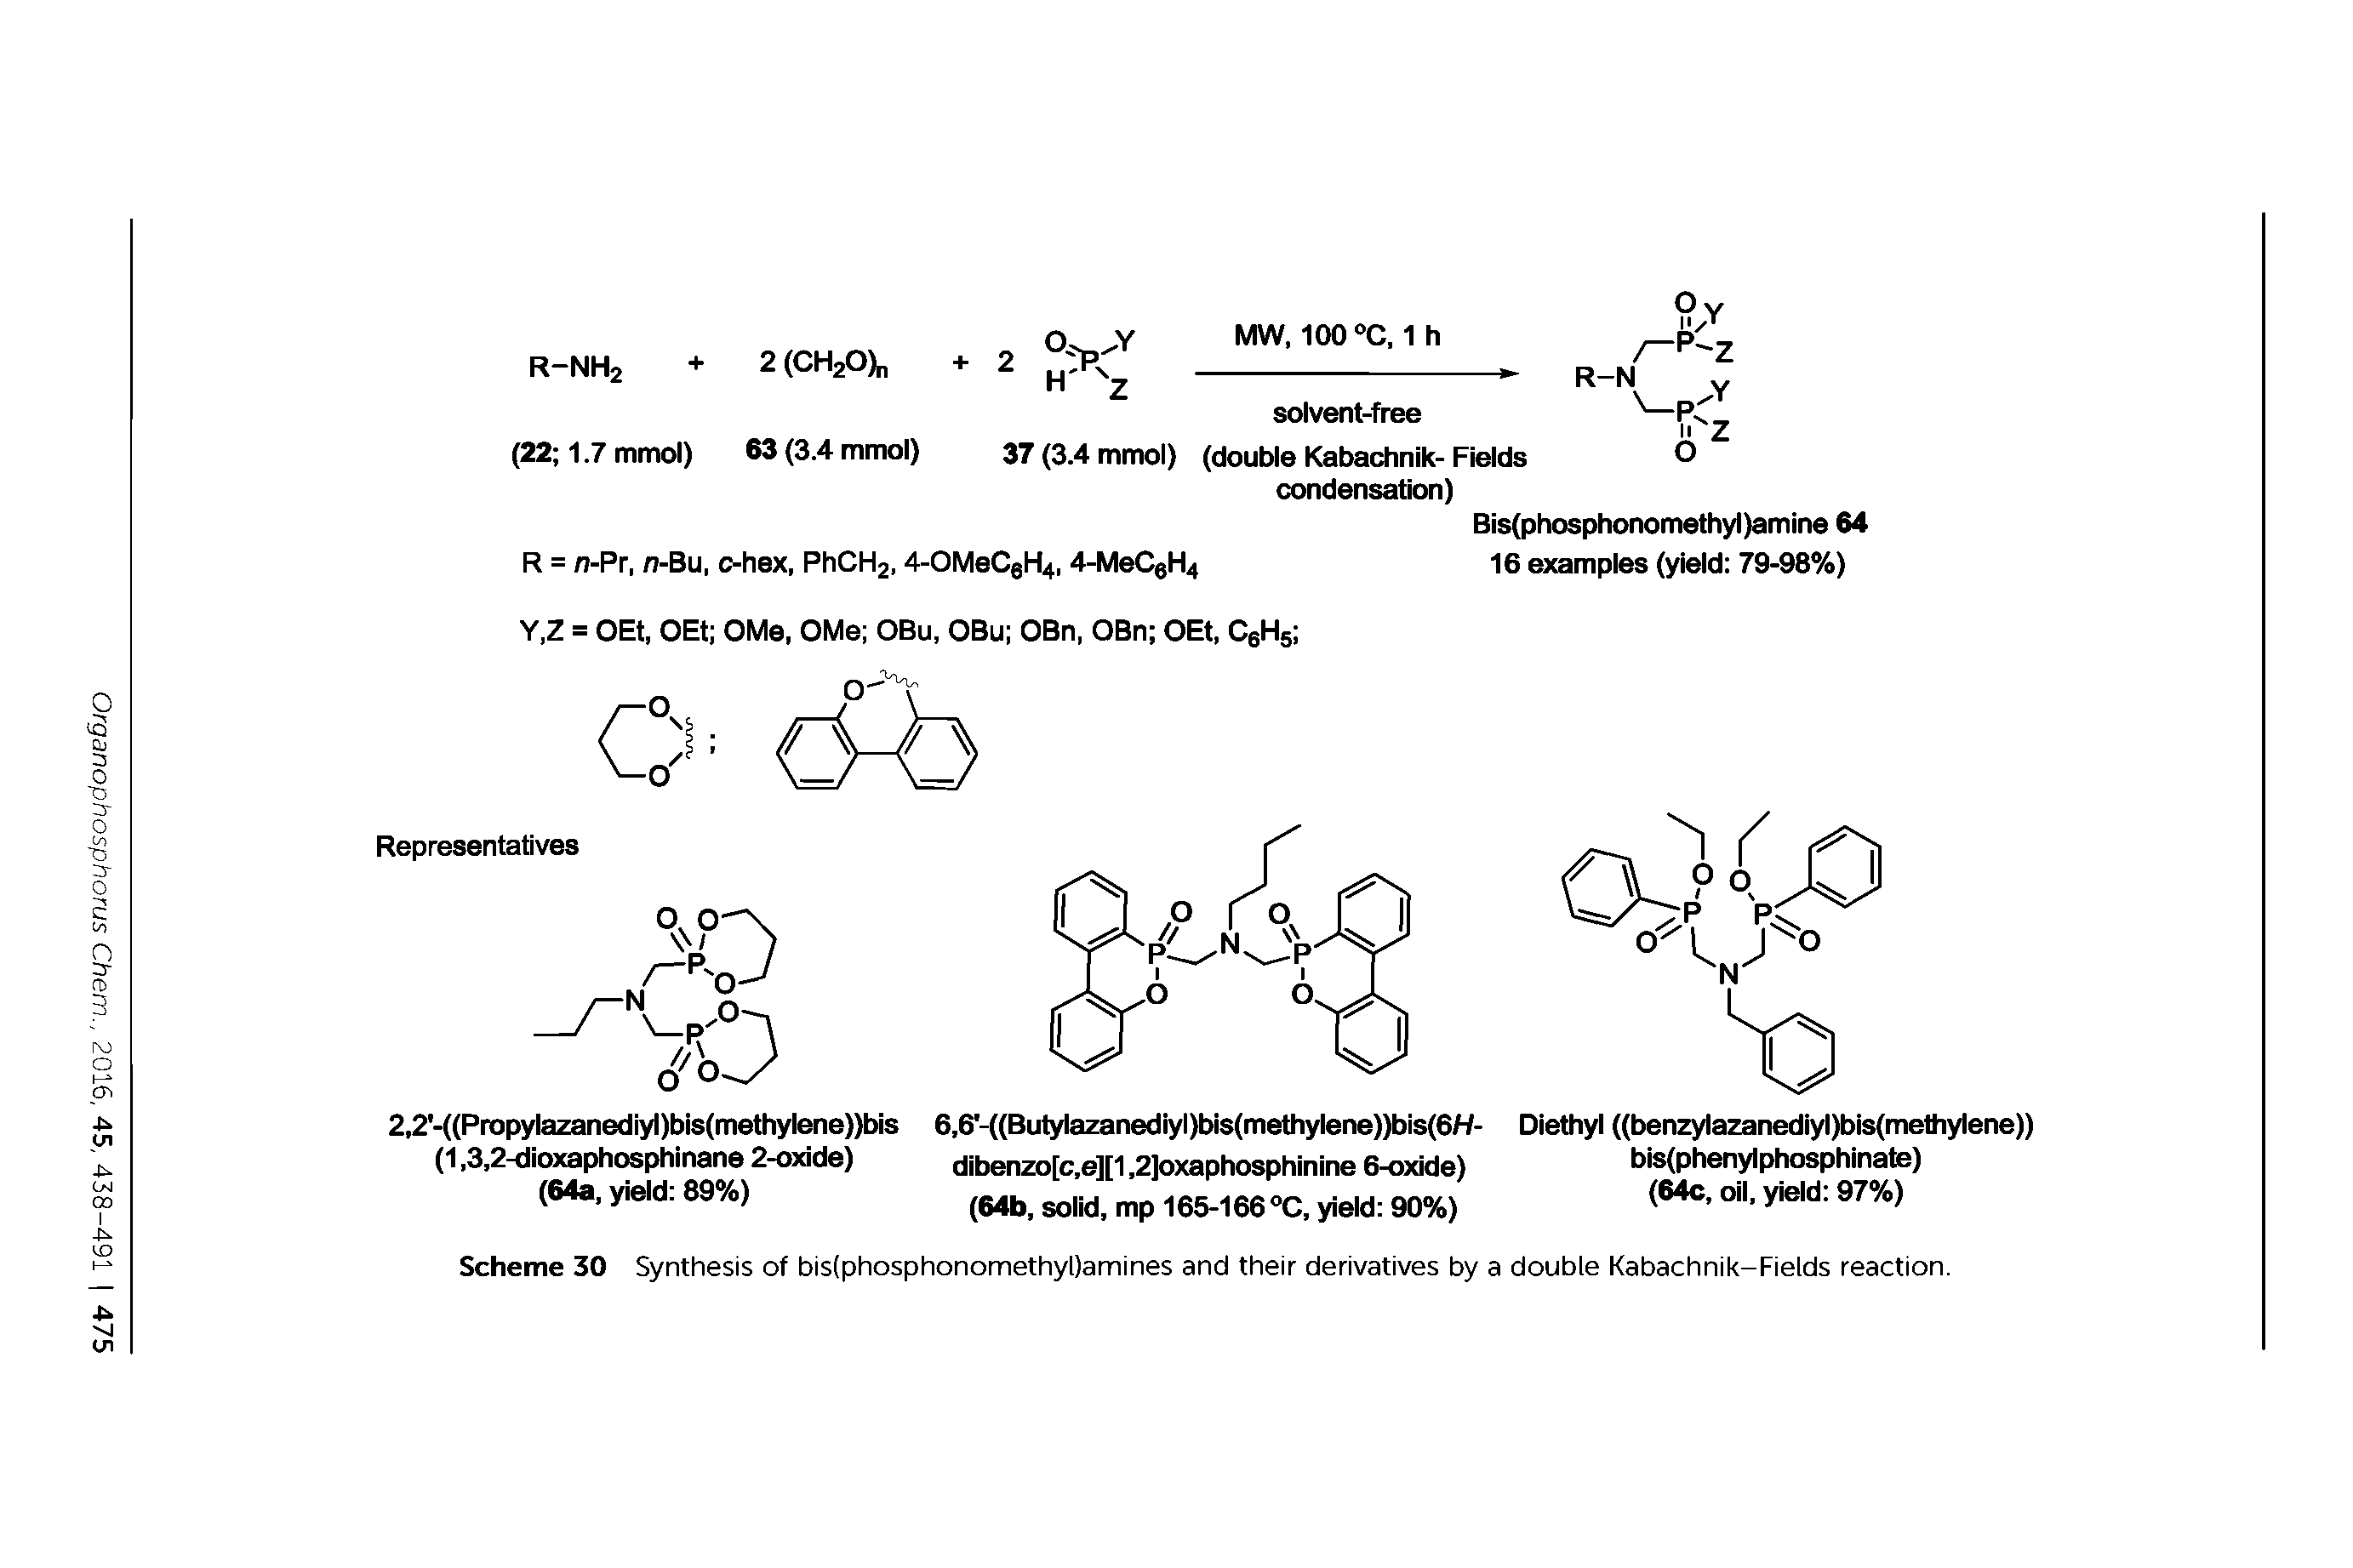 Scheme 30 Synthesis of bis(phosphonomethyl)amines and their derivatives by a double Kabachnik-Fields reaction.